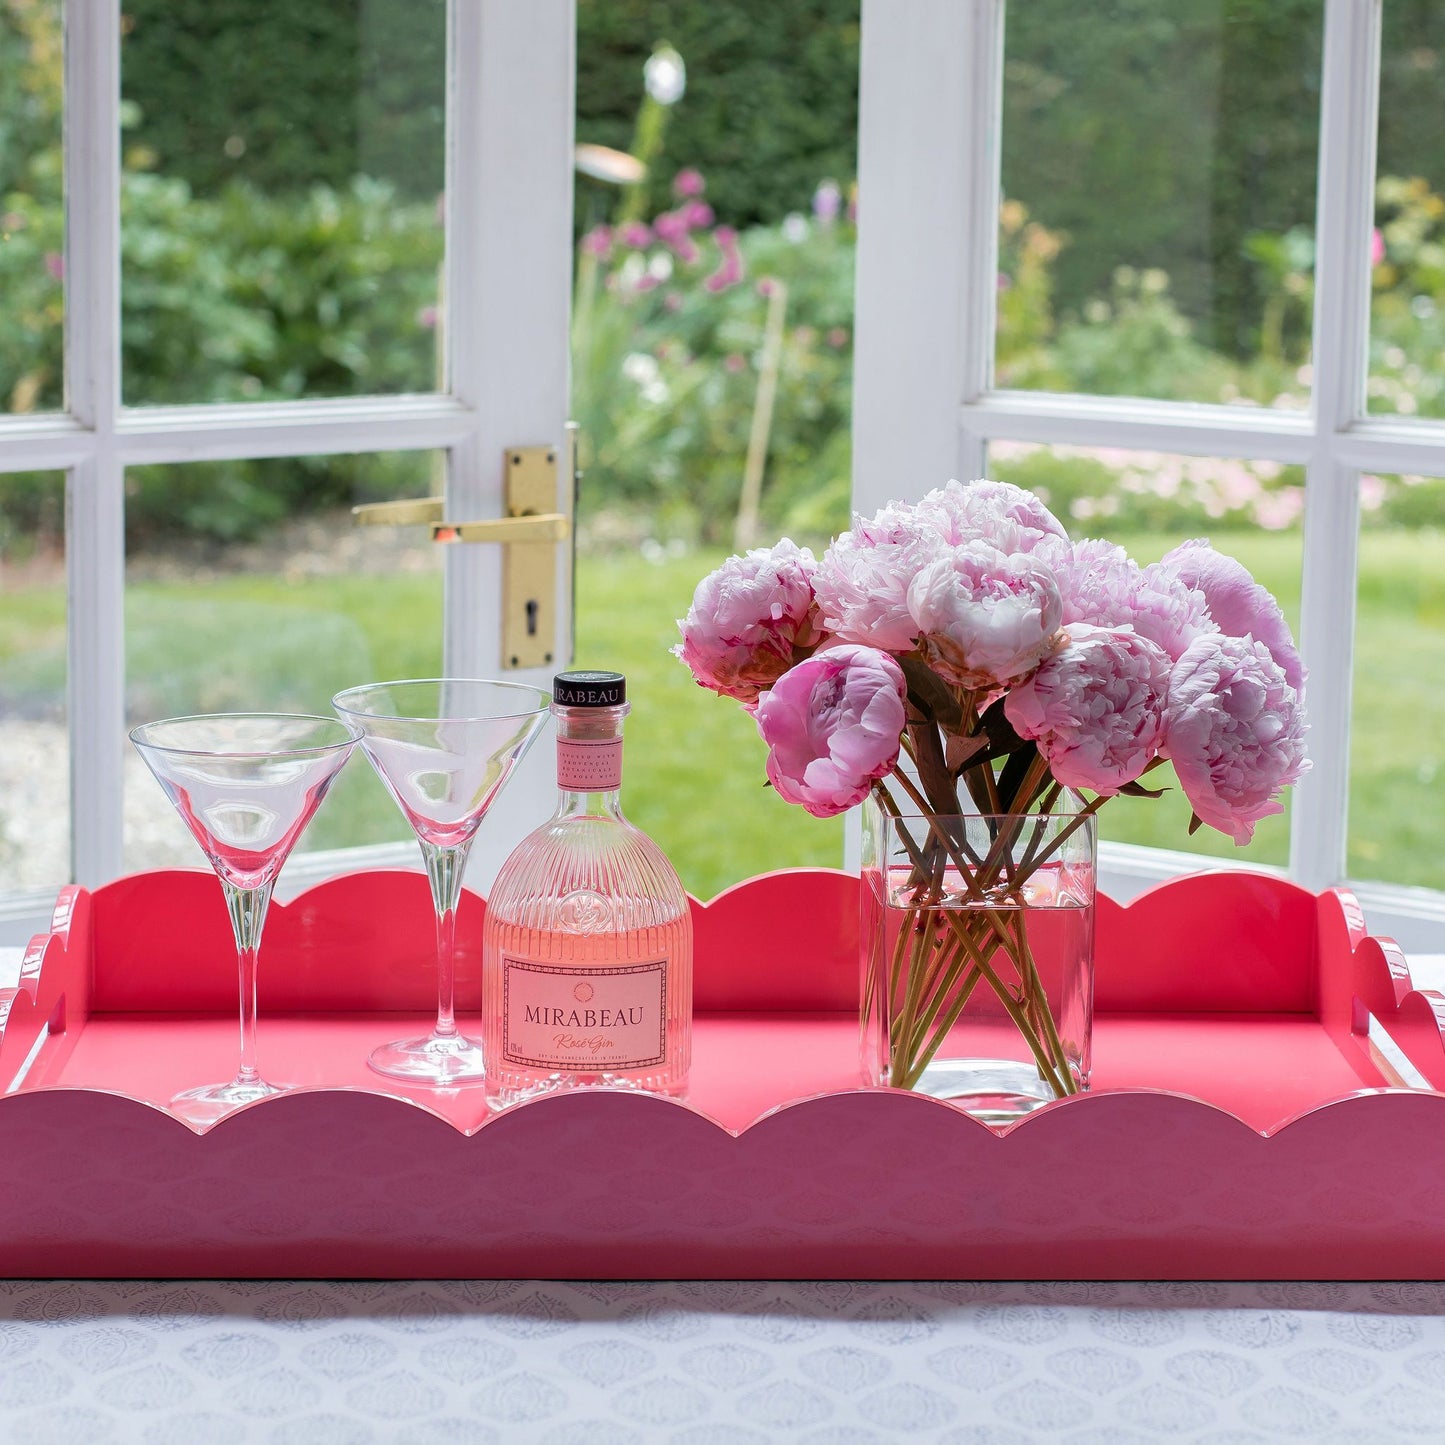 Drinks served on a large pink lacquer tray